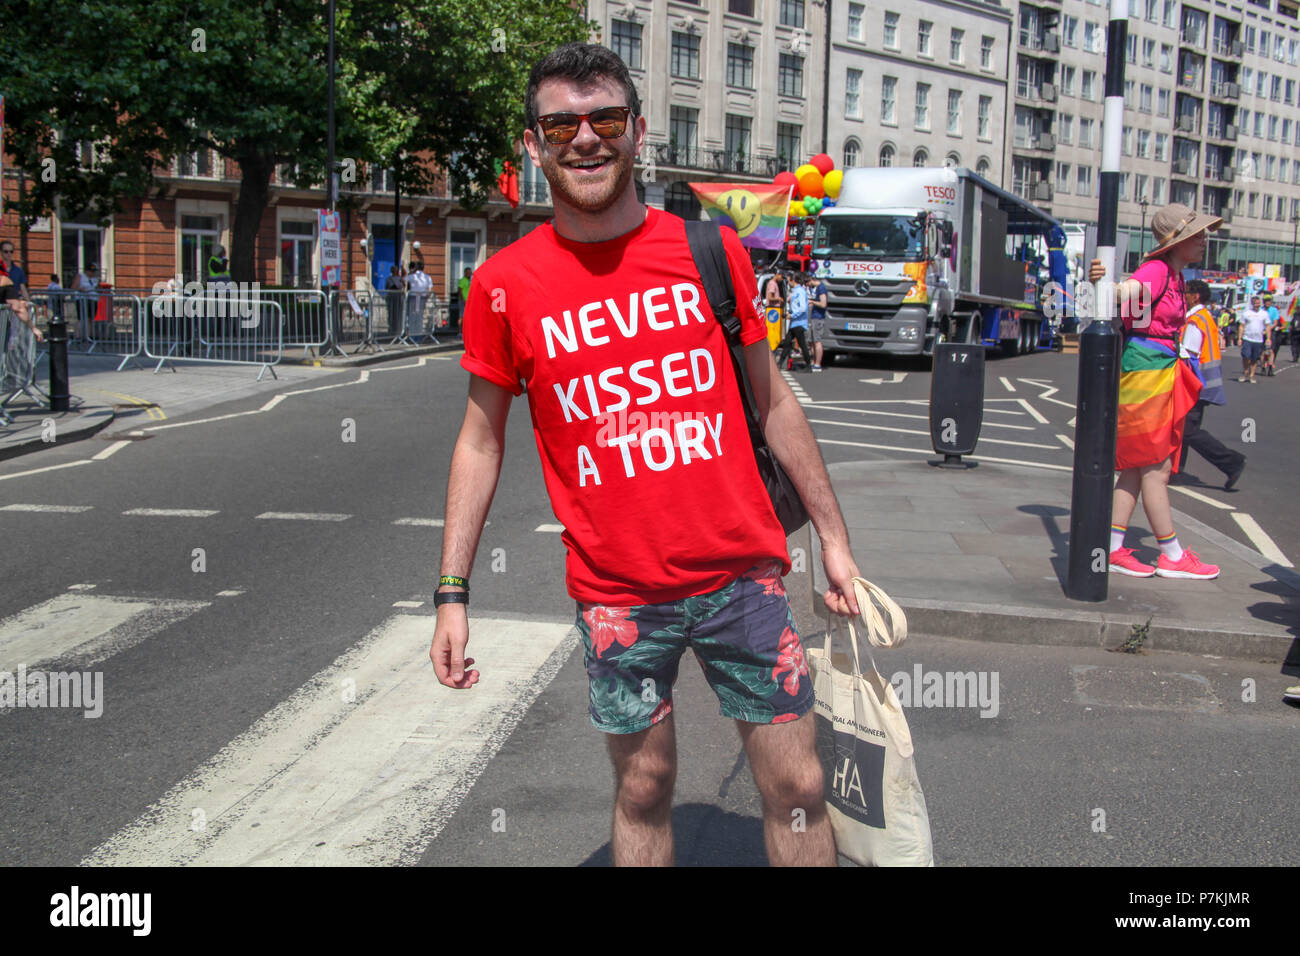 London, UK. 7th July 2018. Participant at Pride in London Credit: Alex Cavendish/Alamy Live News Stock Photo